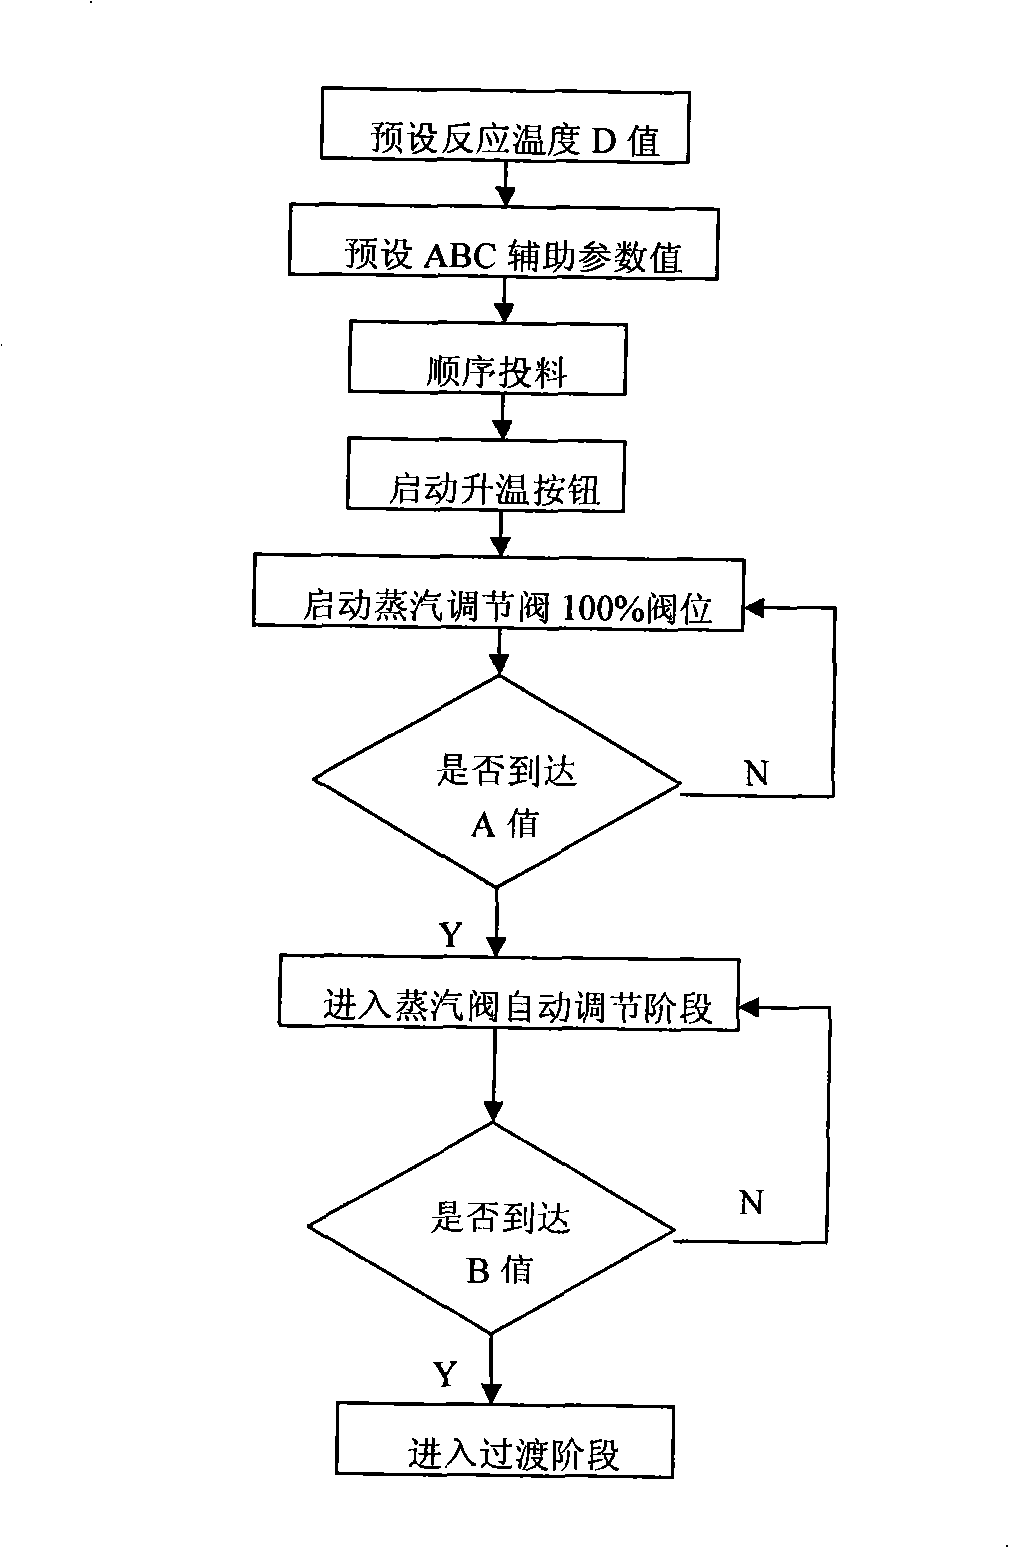 Polychloroethylene production reaction temperature control method for small-sized polymerization kettle DCS